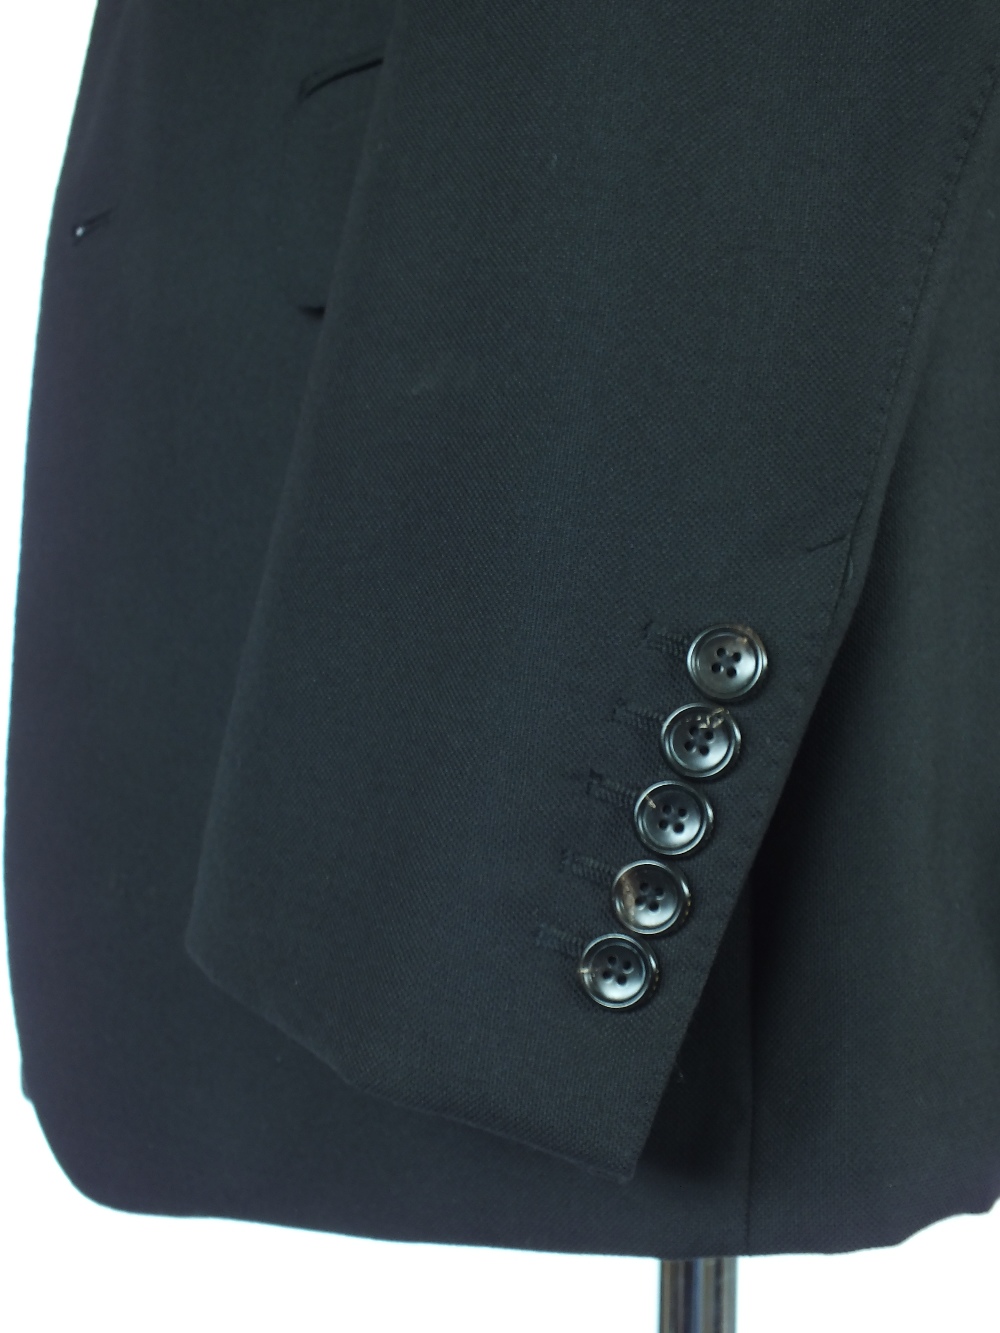 A Gucci dinner jacket, black, part velvet collar, double vented, lined, Italian size 50R, 100% wool - Image 6 of 6